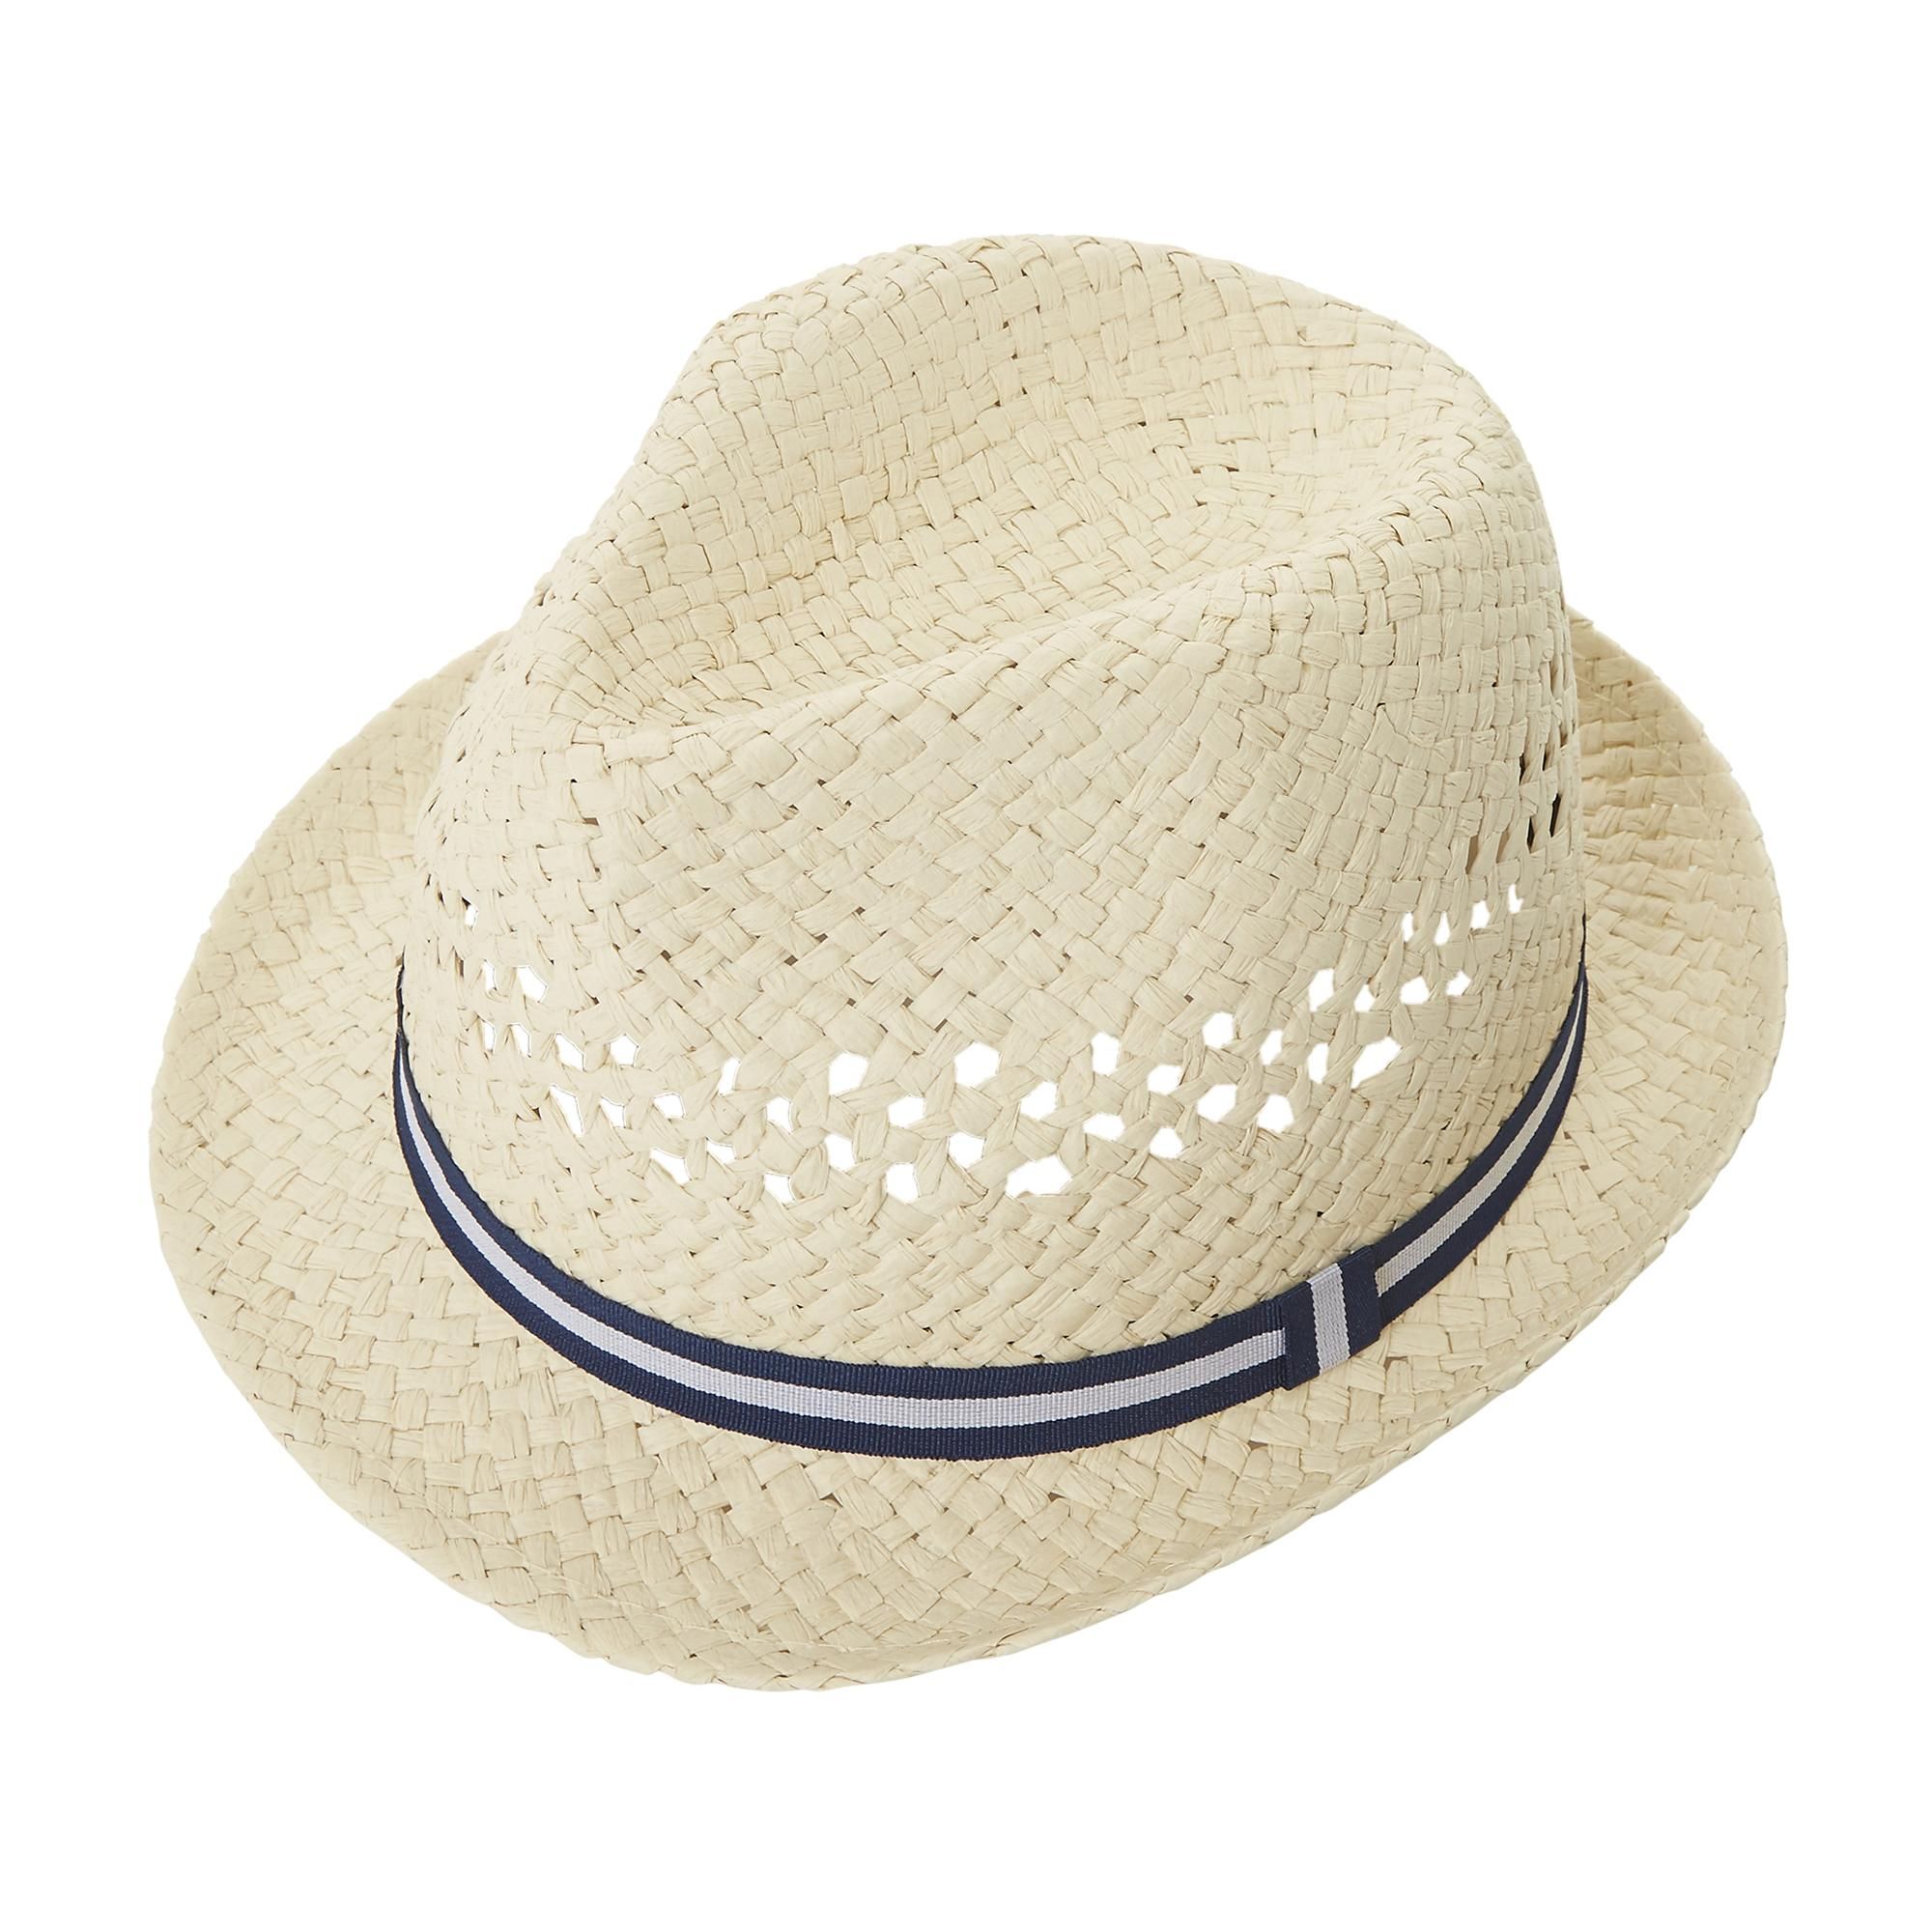 Stay cool in style this summer with this versatile Nester trilby hat. Crafted from woven straw material with a contrasting tape detail hat band. This timeless accessory is effortlessly versatile.